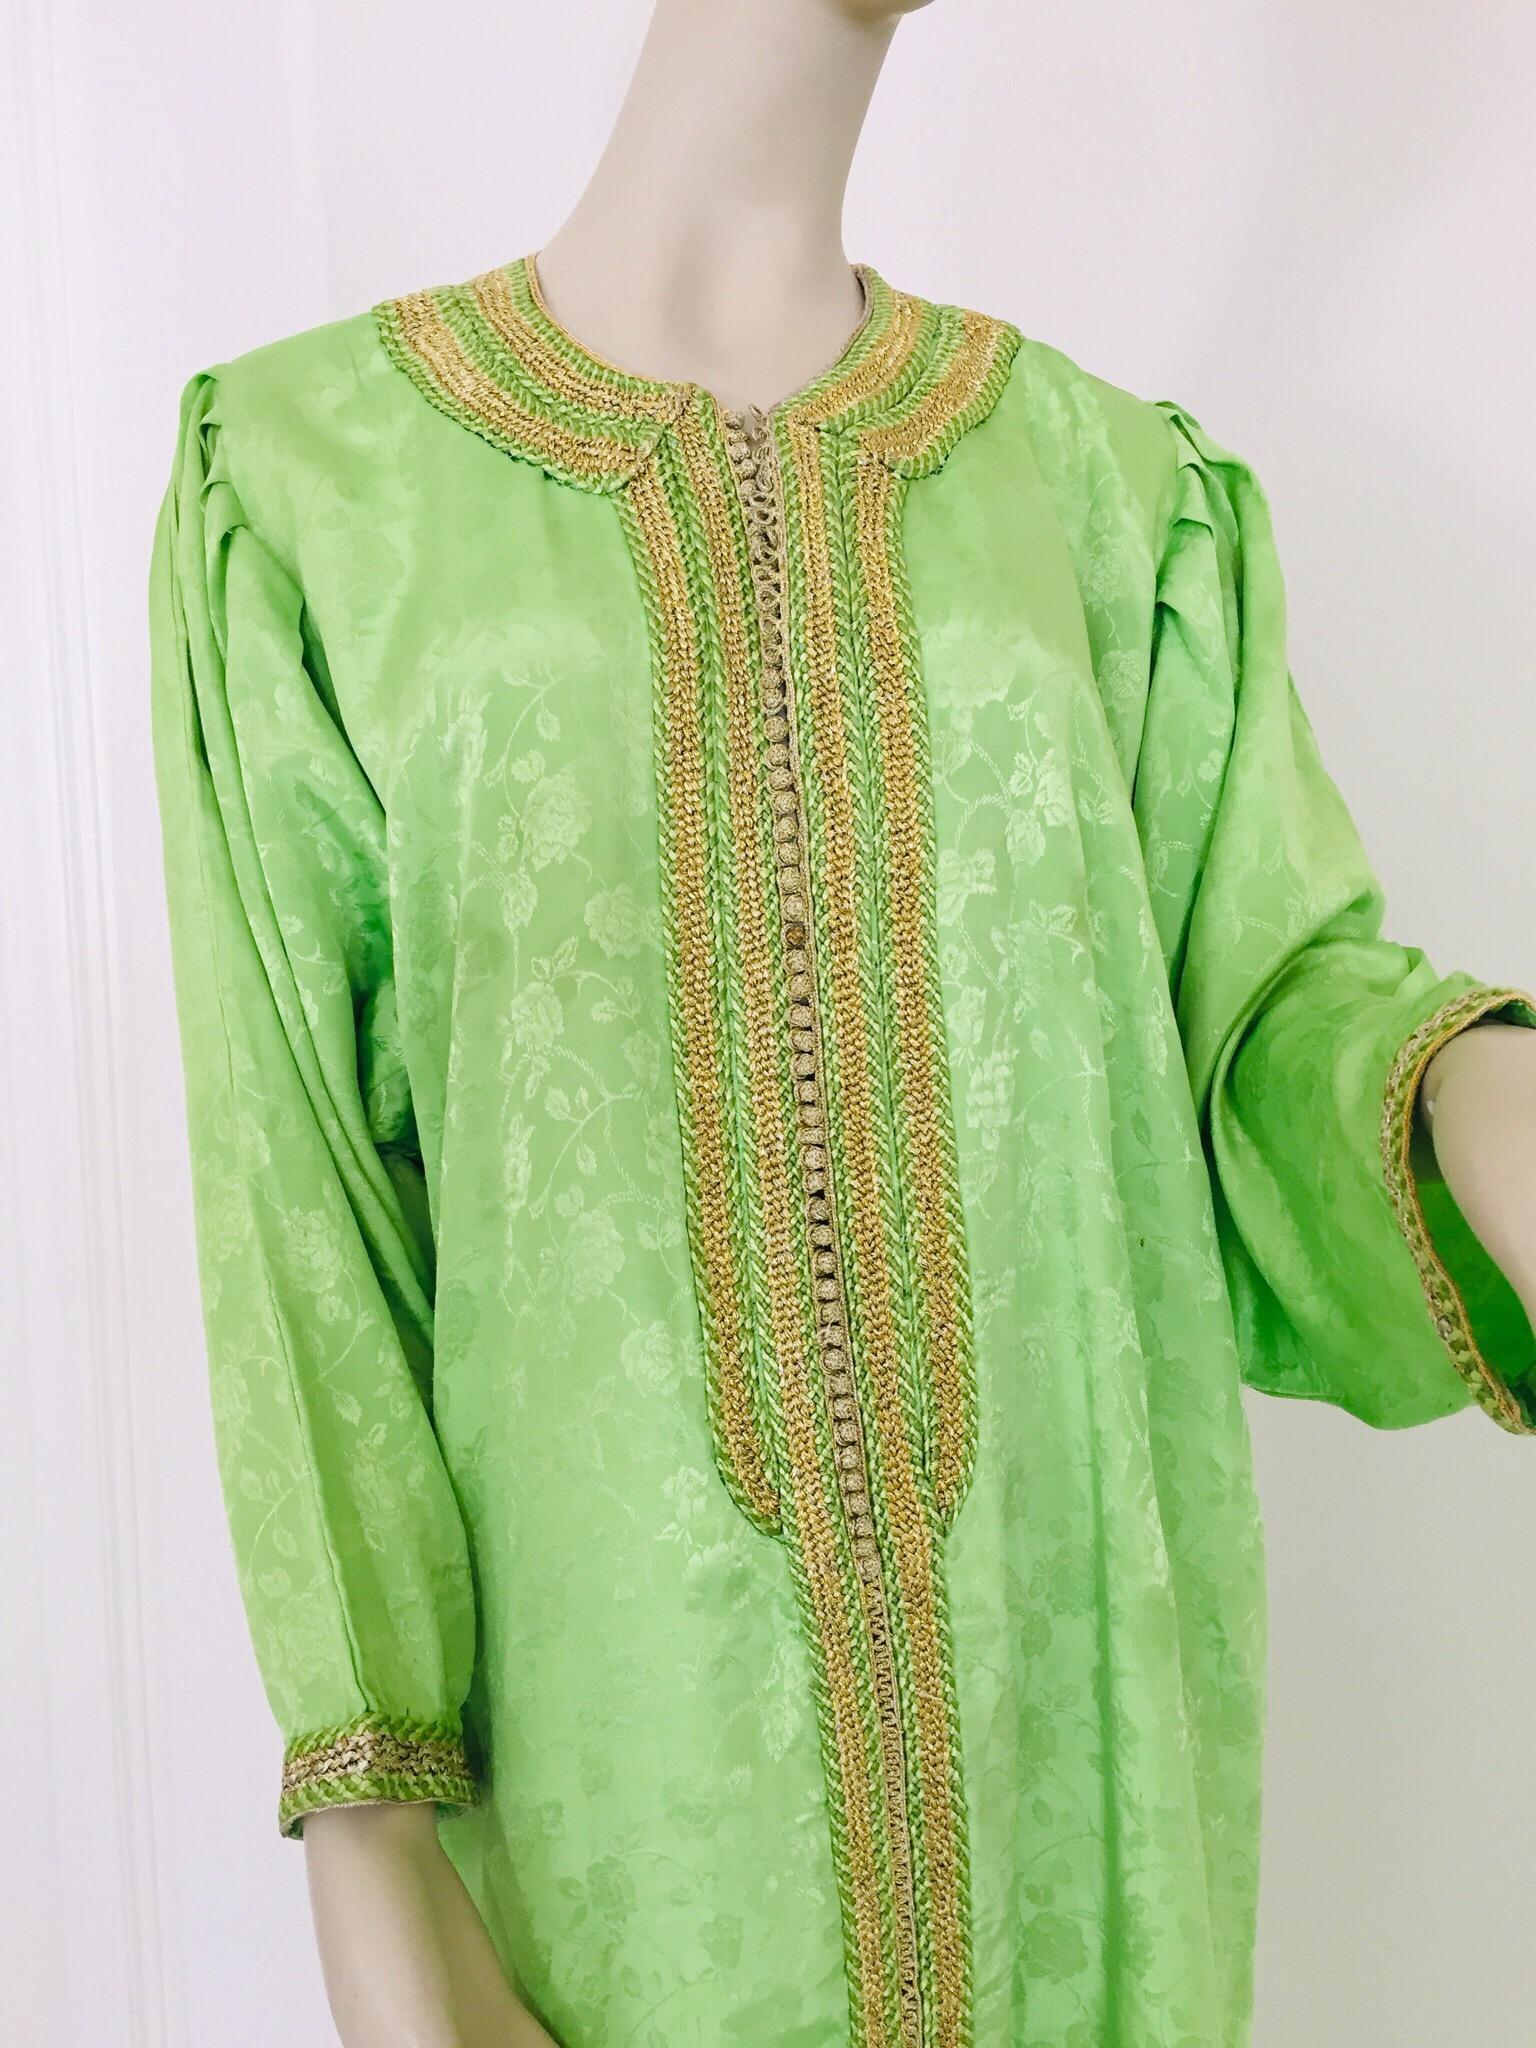 Elegant Moroccan Caftan Green and Gold Embroidered with Moorish Designs For Sale 2